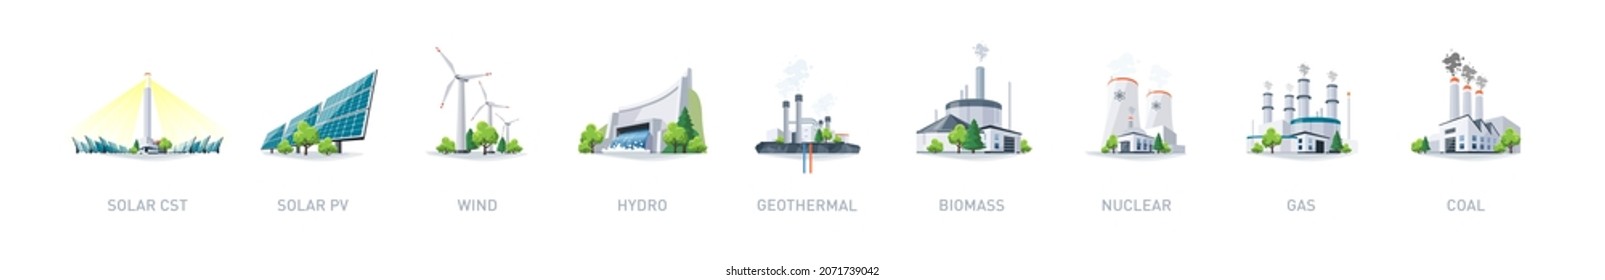 Electricity generation source types. Energy mix solar, water, fossil, wind, nuclear, coal, gas, geothermal and biomass. Renewable power plants station resources. Natural, thermal, hydro and chemical. - Shutterstock ID 2071739042